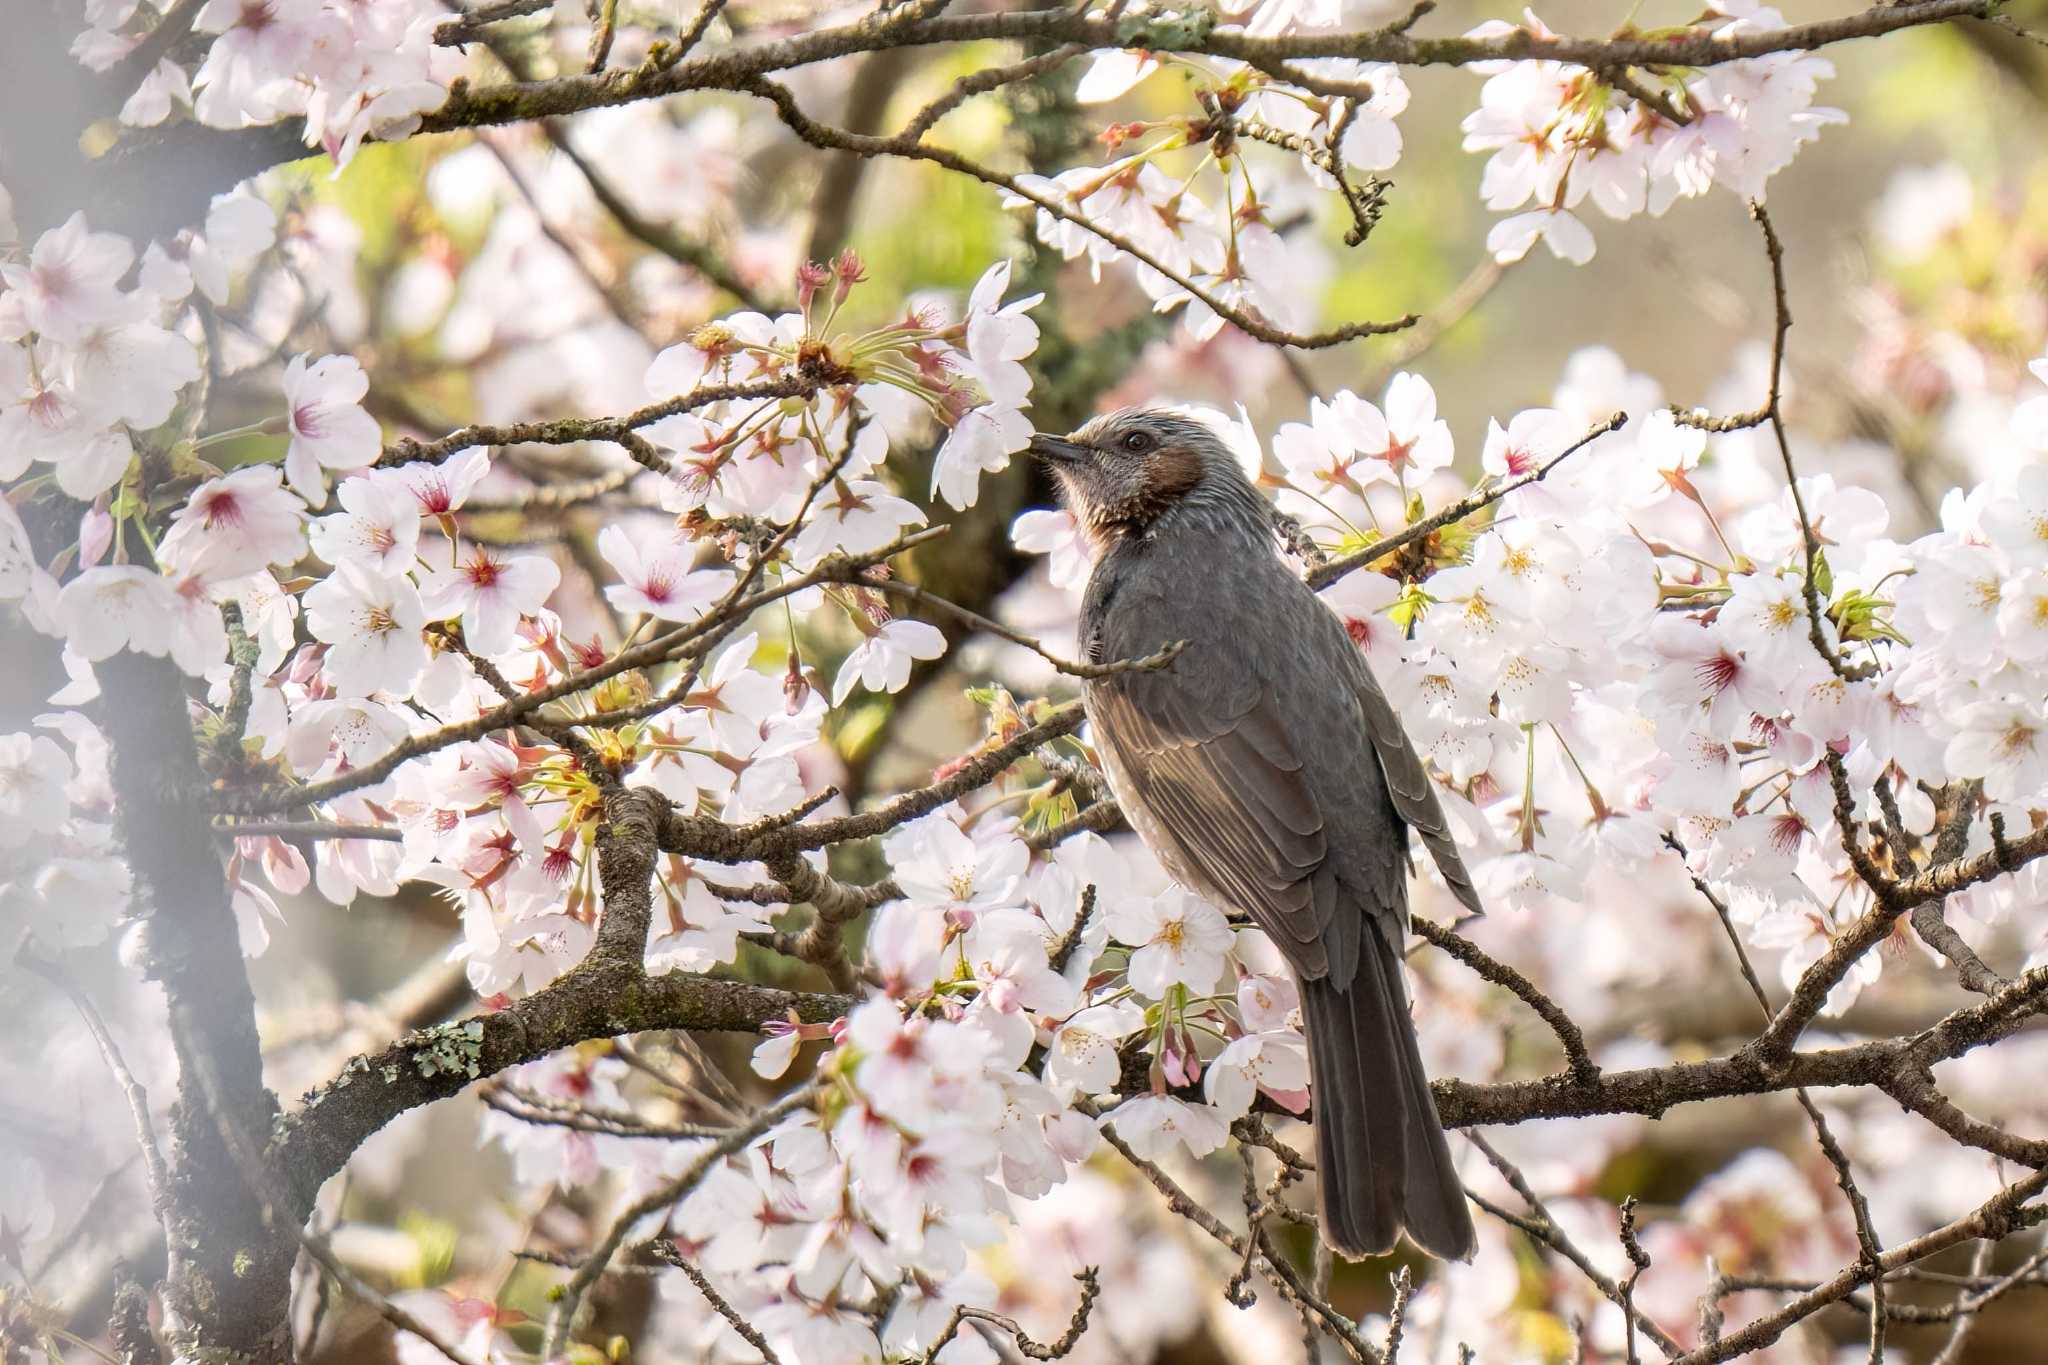 Photo of Brown-eared Bulbul at 愛知県緑化センター 昭和の森 by porco nero